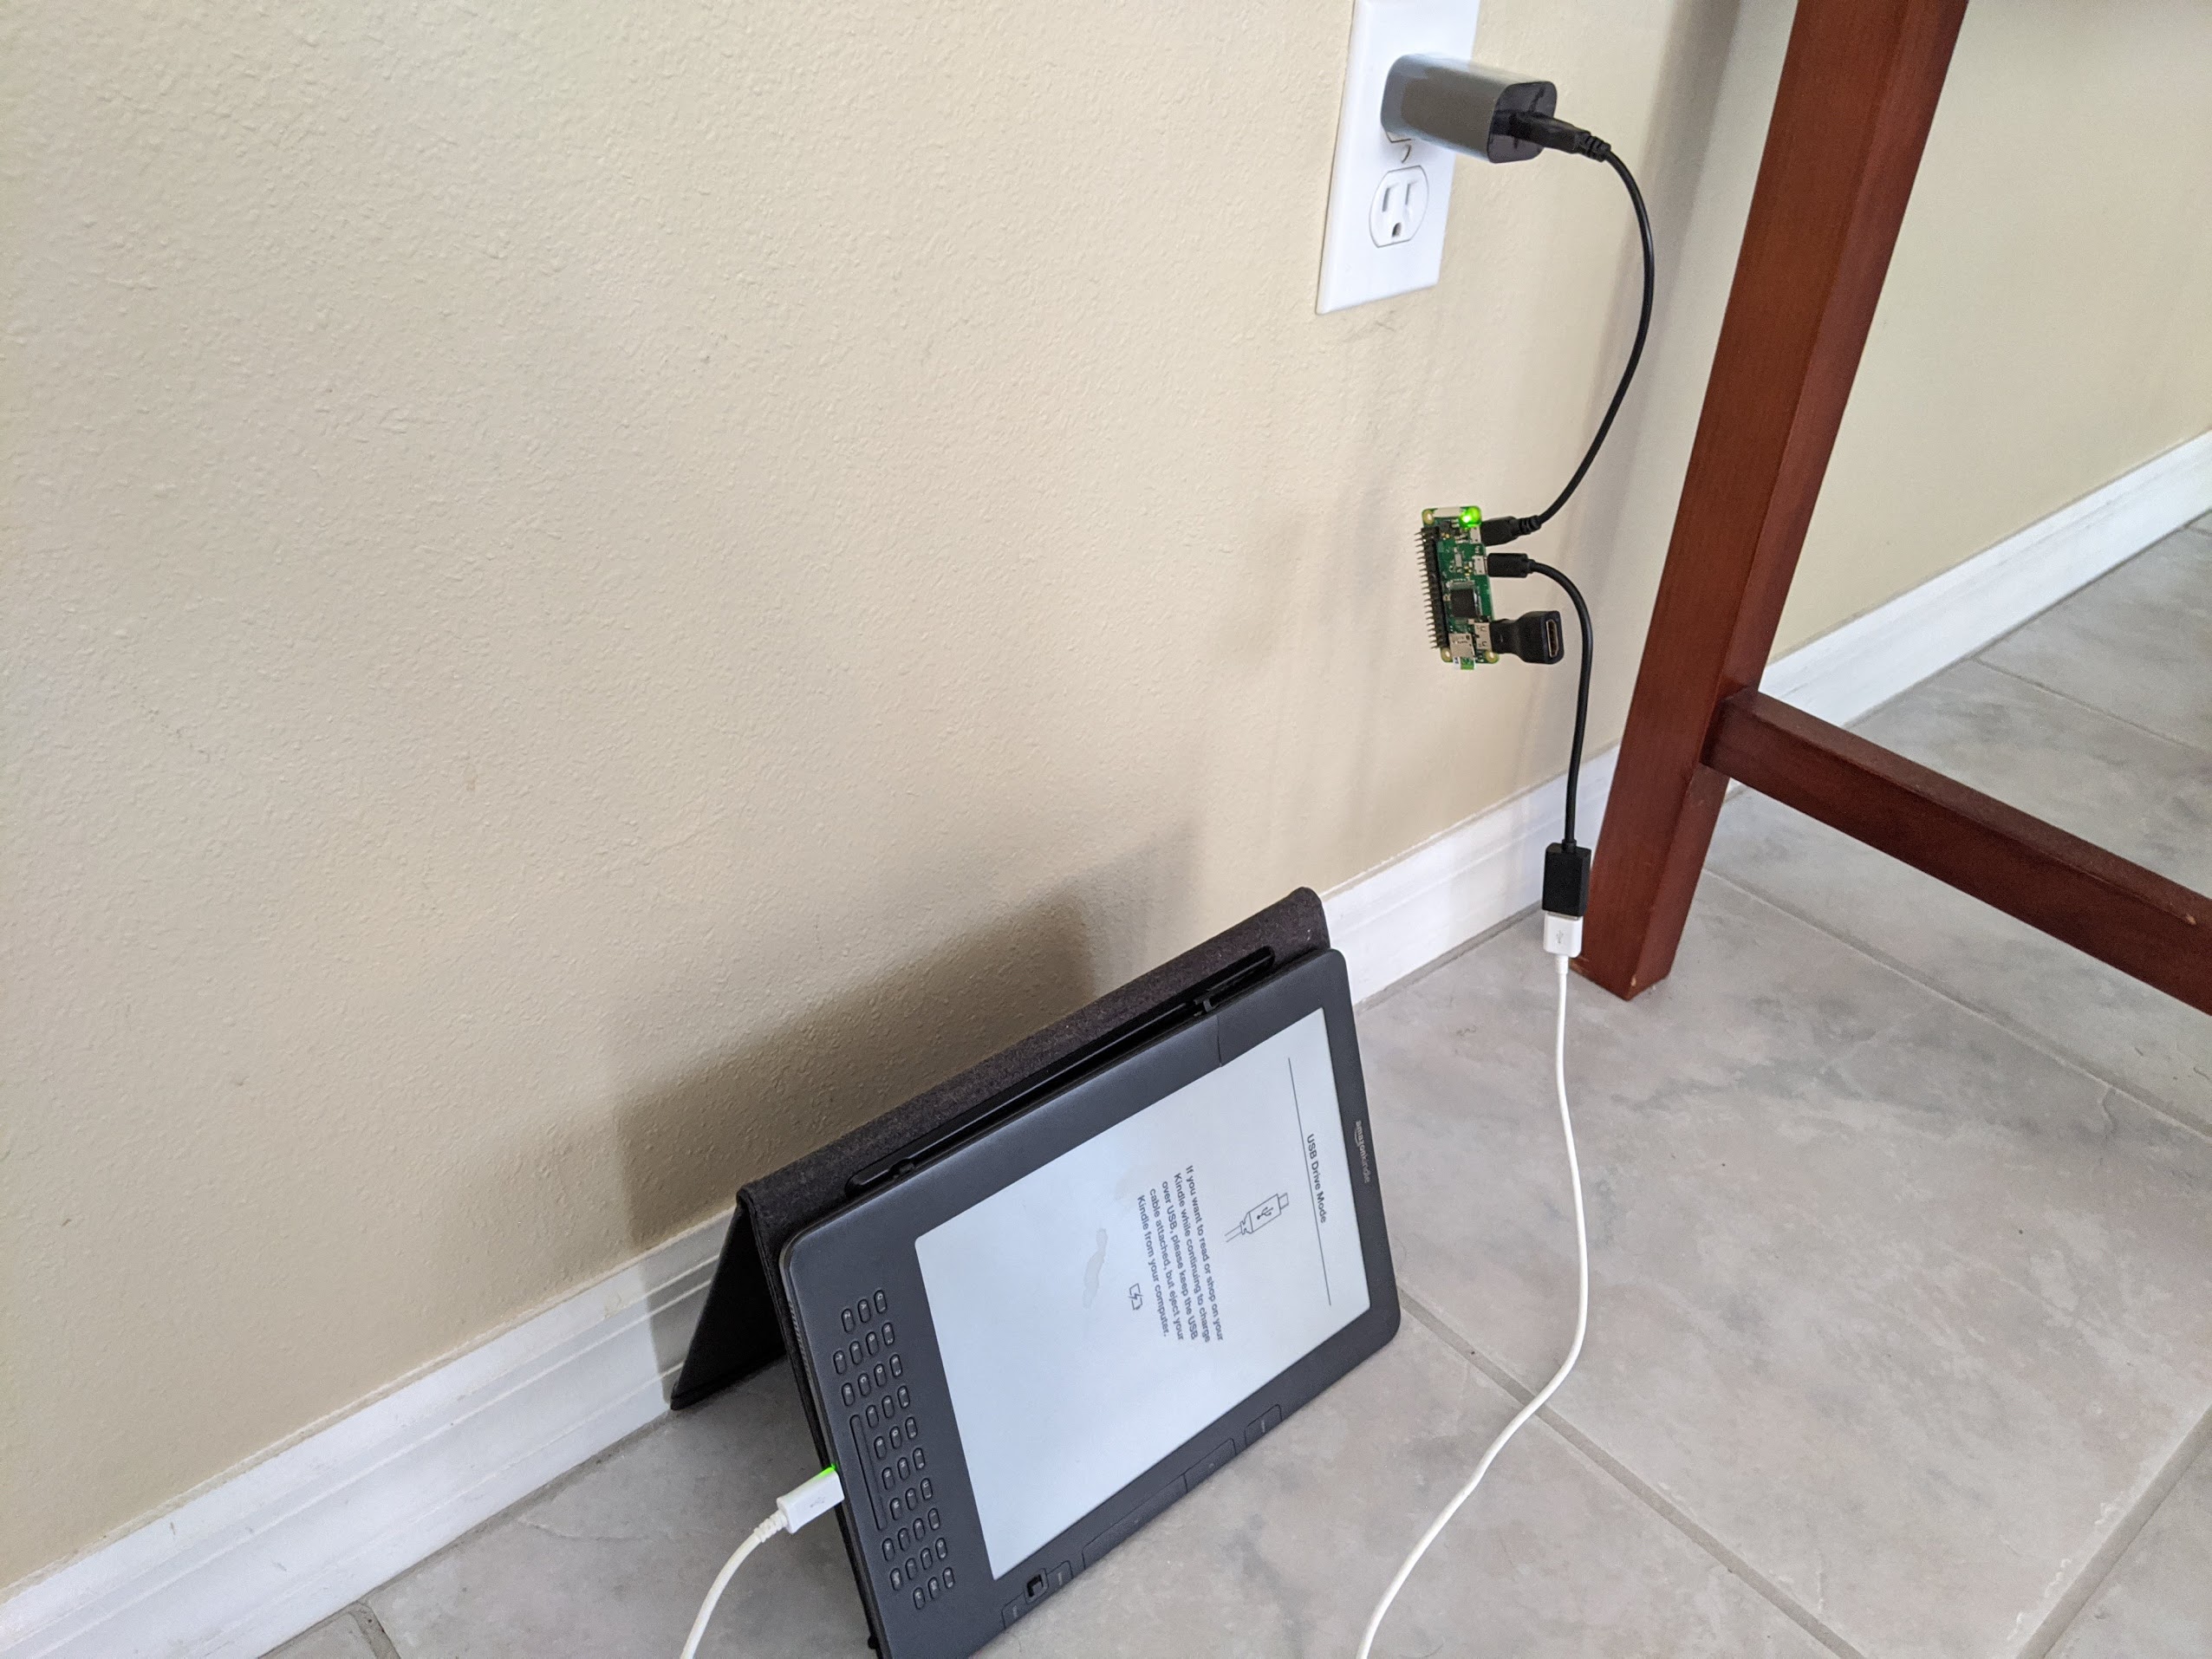 Pi connected to Kindle